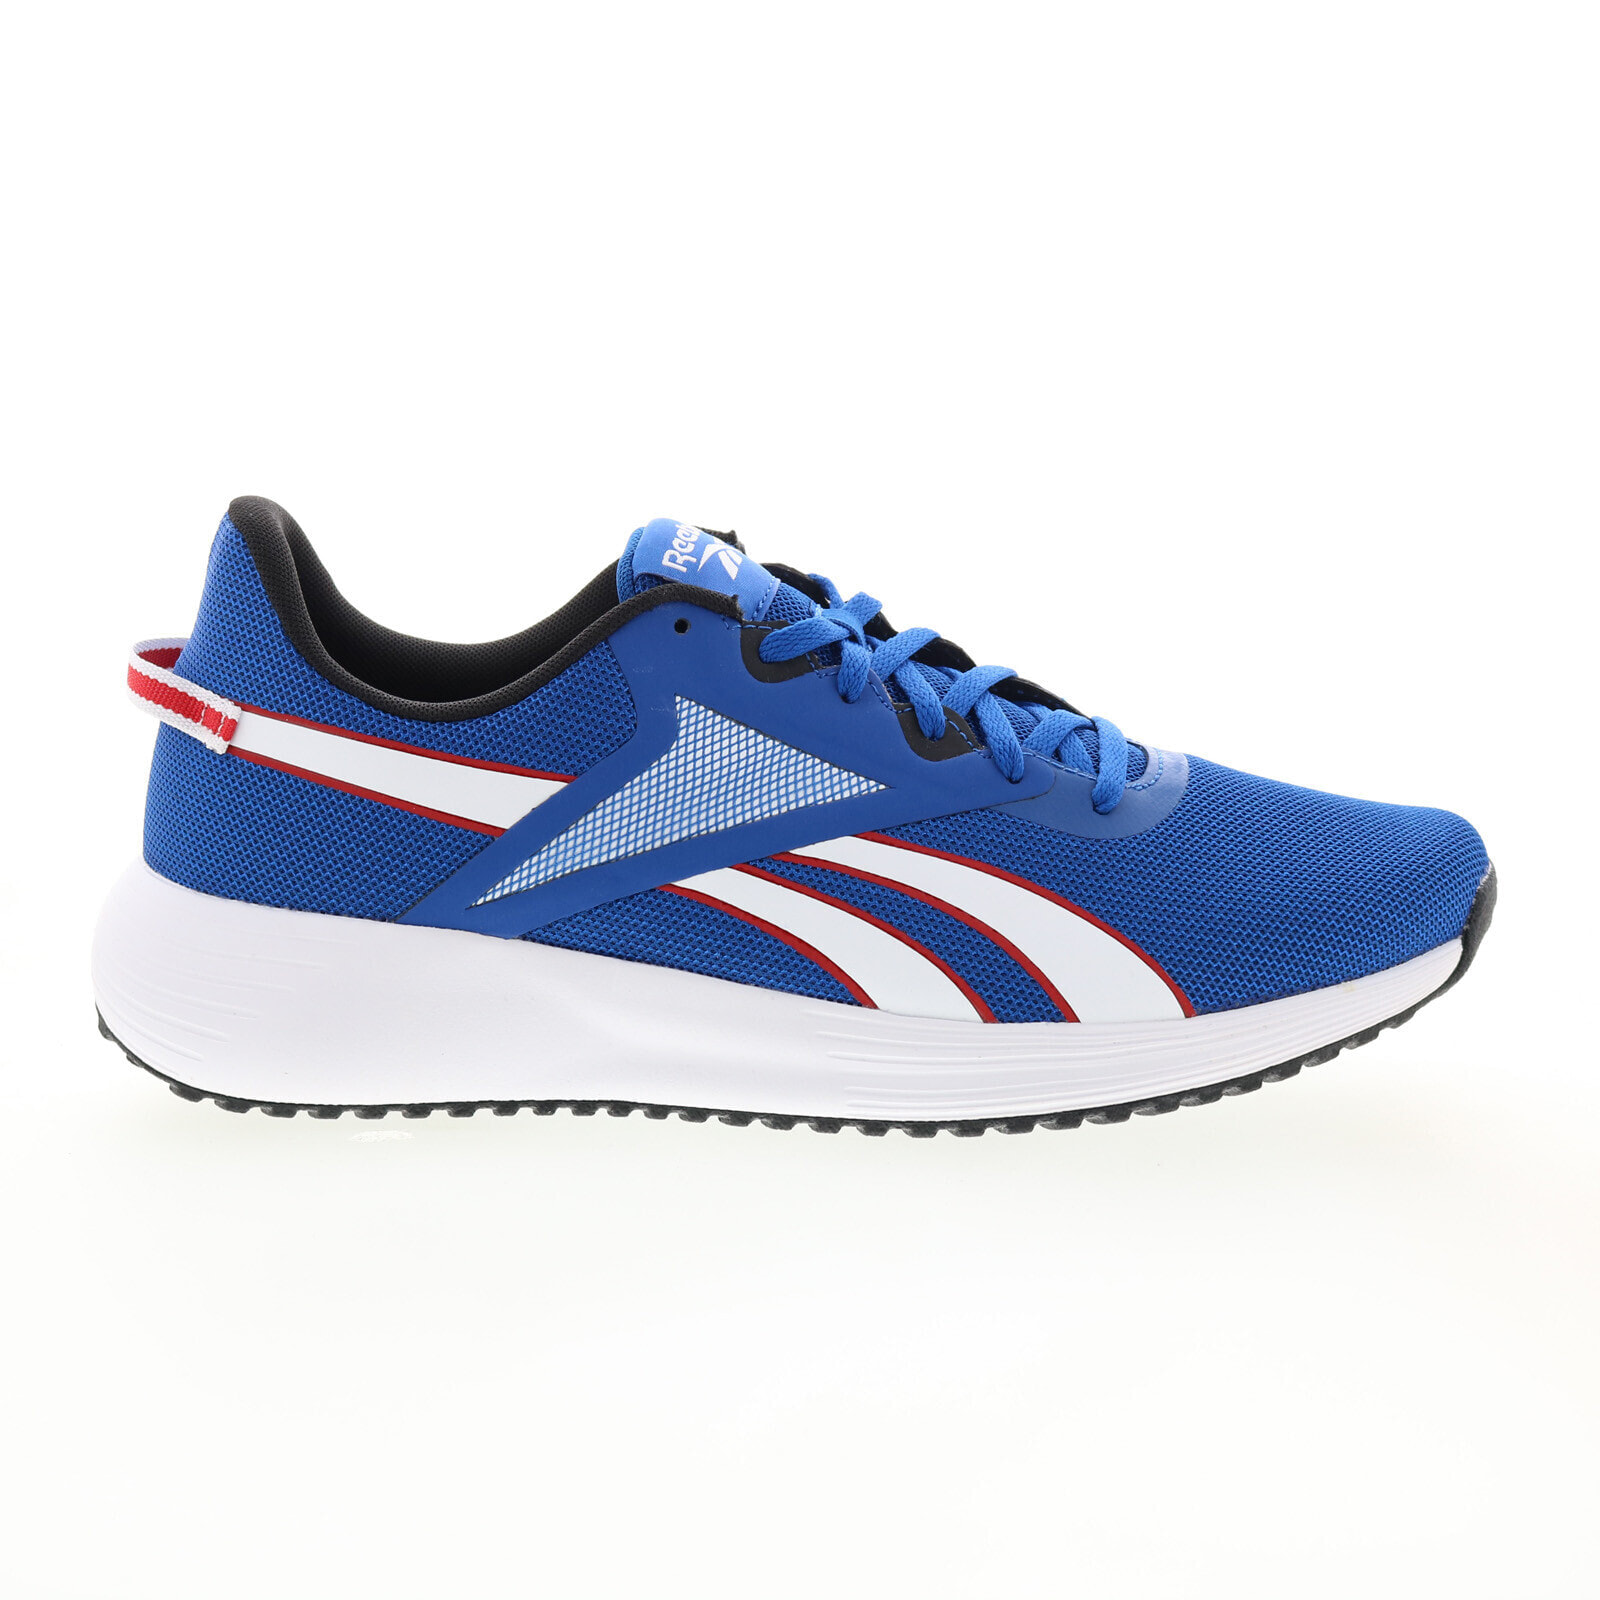 Reebok Lite Plus 3 GY3965 Mens Blue Canvas Athletic Running Shoes